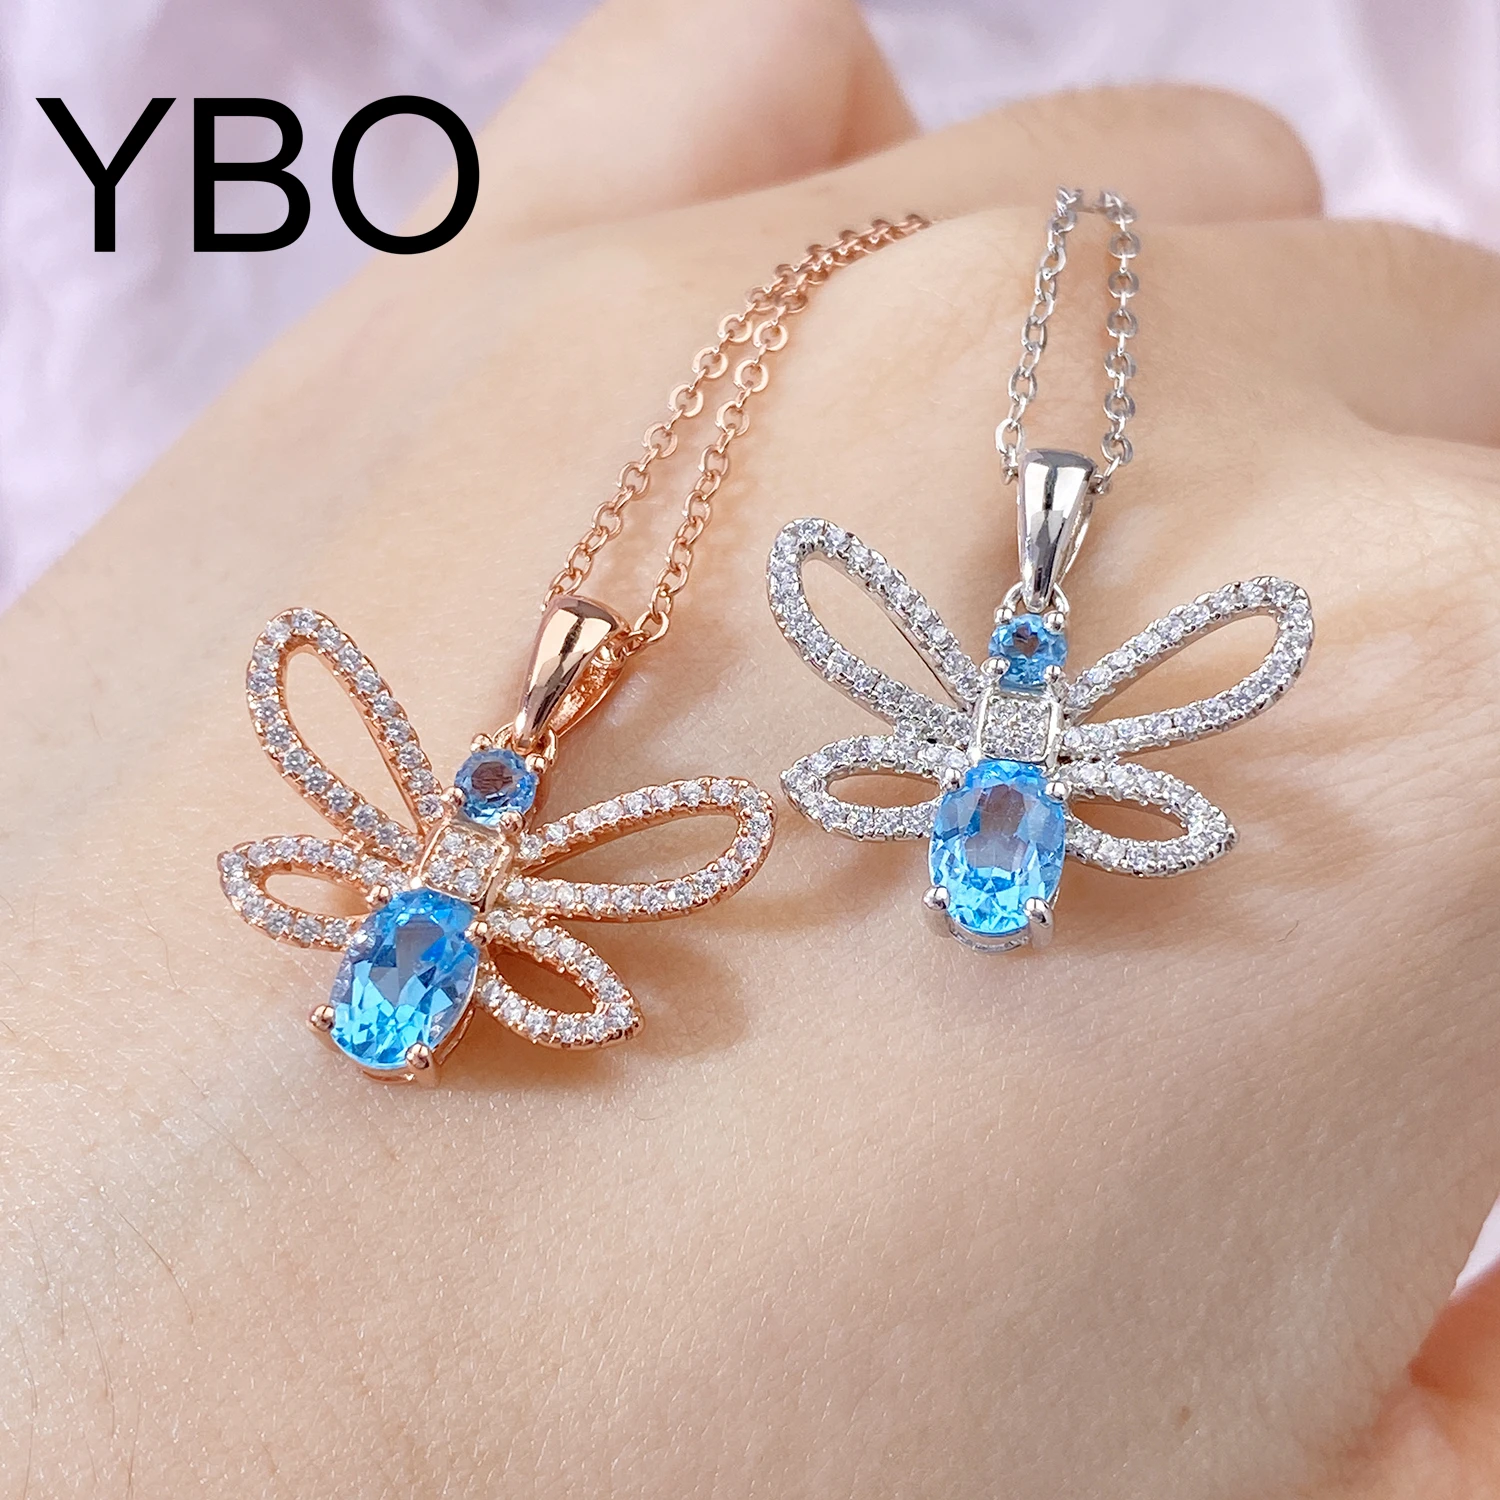 

YBO Cute Animal Bee Pendant Necklaces 925 Sterling Silver Natural Swiss Blue Topaz 4A Cubic Zircon cz Clavicle Chains Jewelry